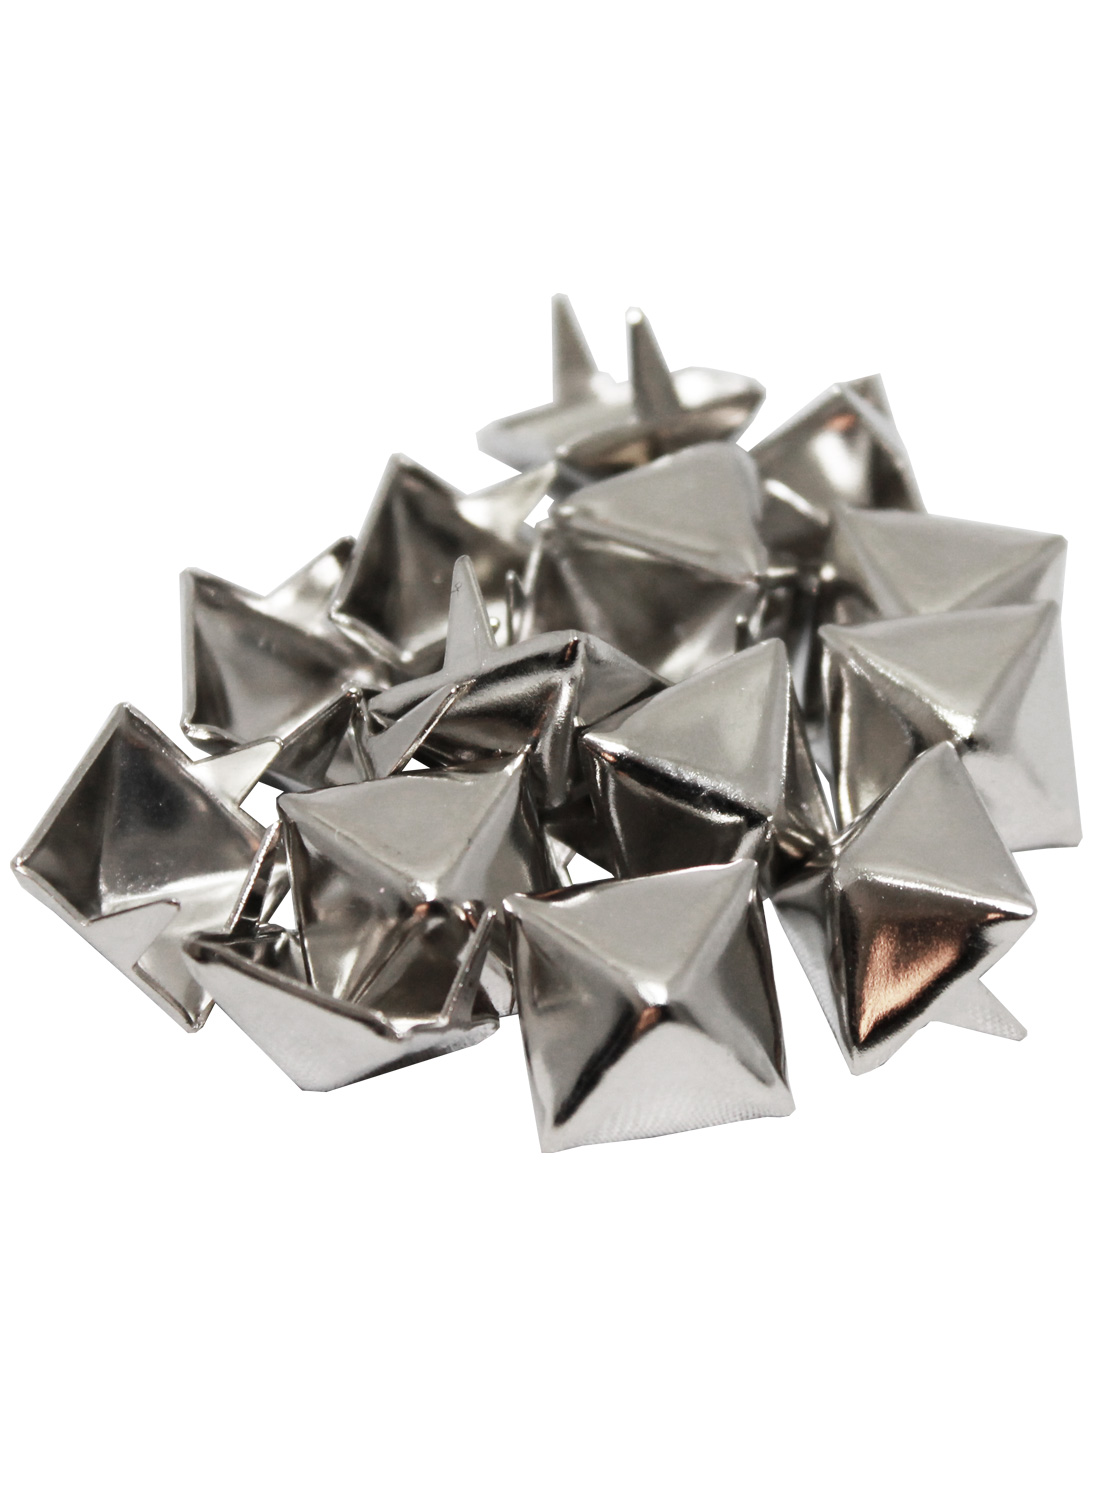 100-Pack Silver Pyramid Studs Small Newstyle